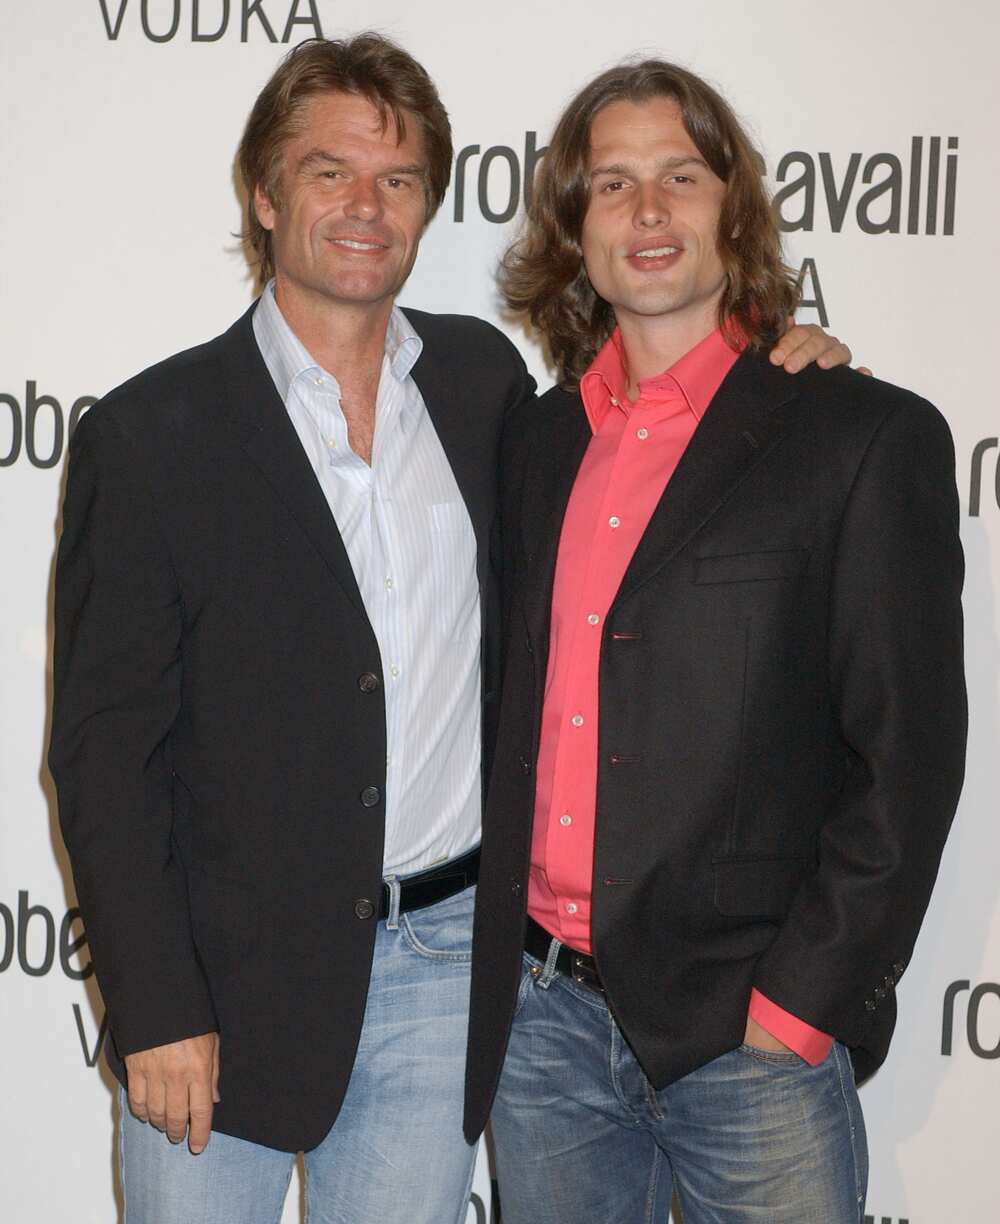 Does Harry Hamlin have a relationship with Dimitri?